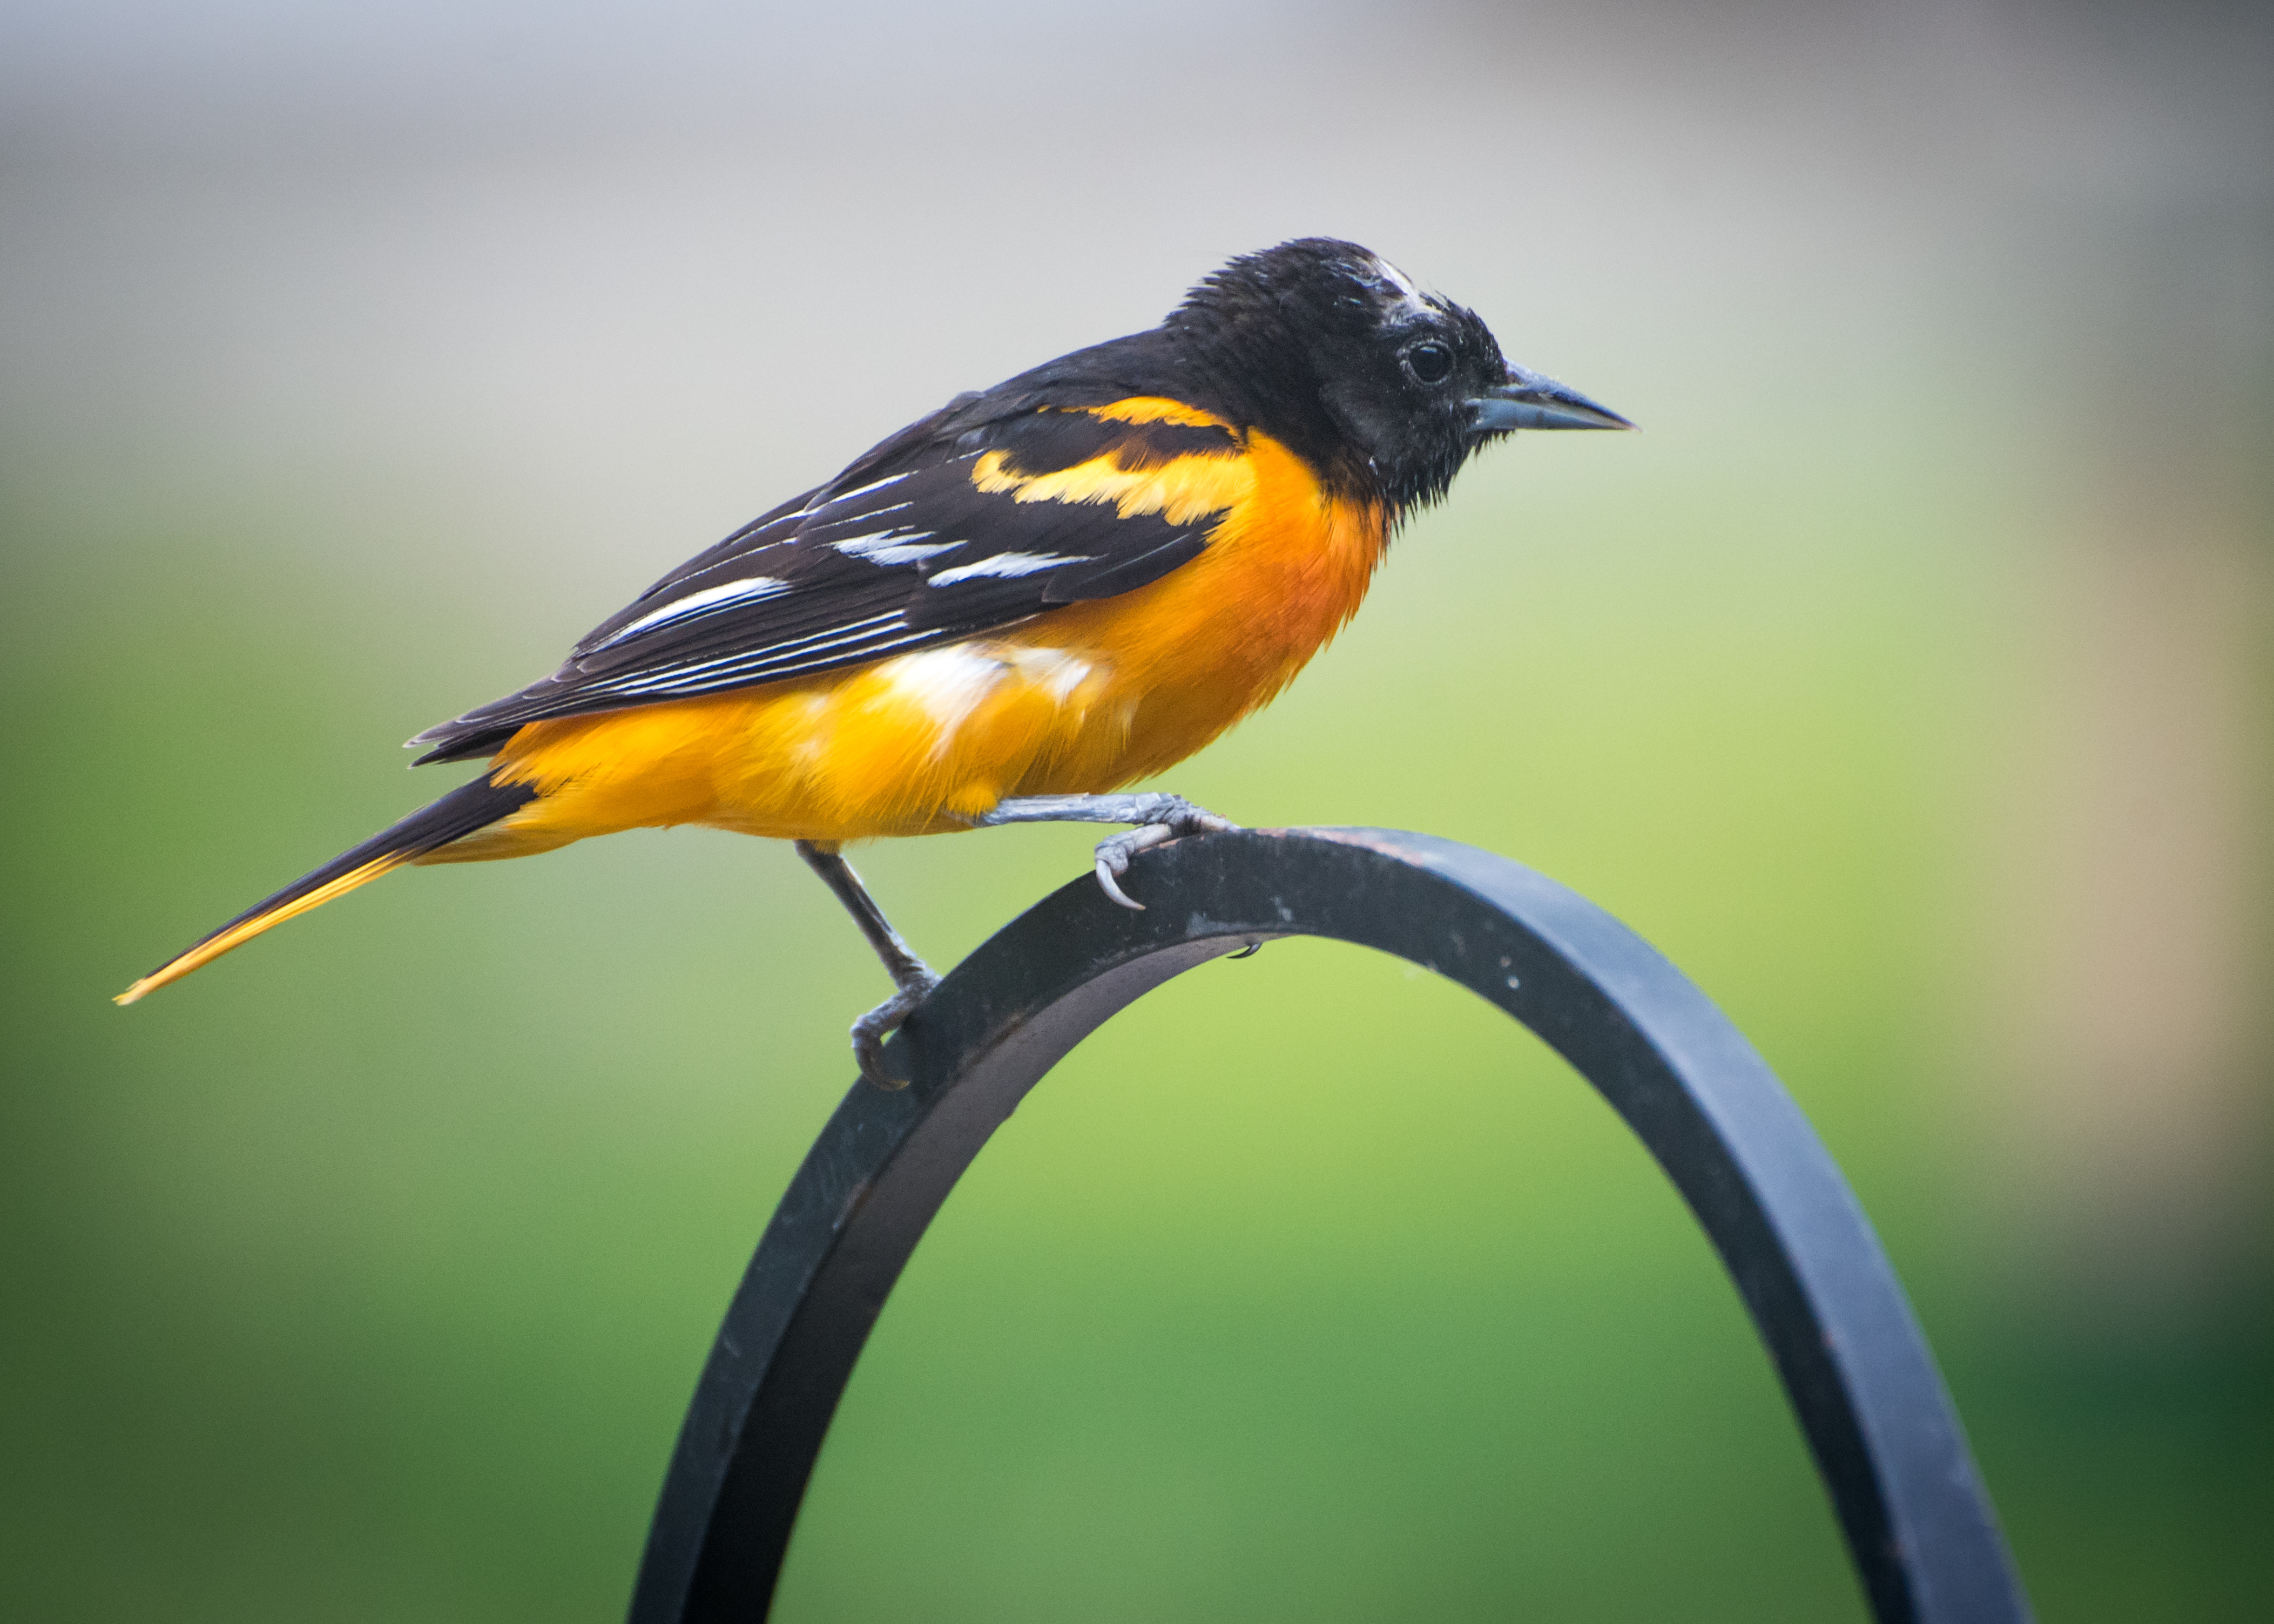 Image of a Baltimore Oriole bird standing on a curved wrought iron bar